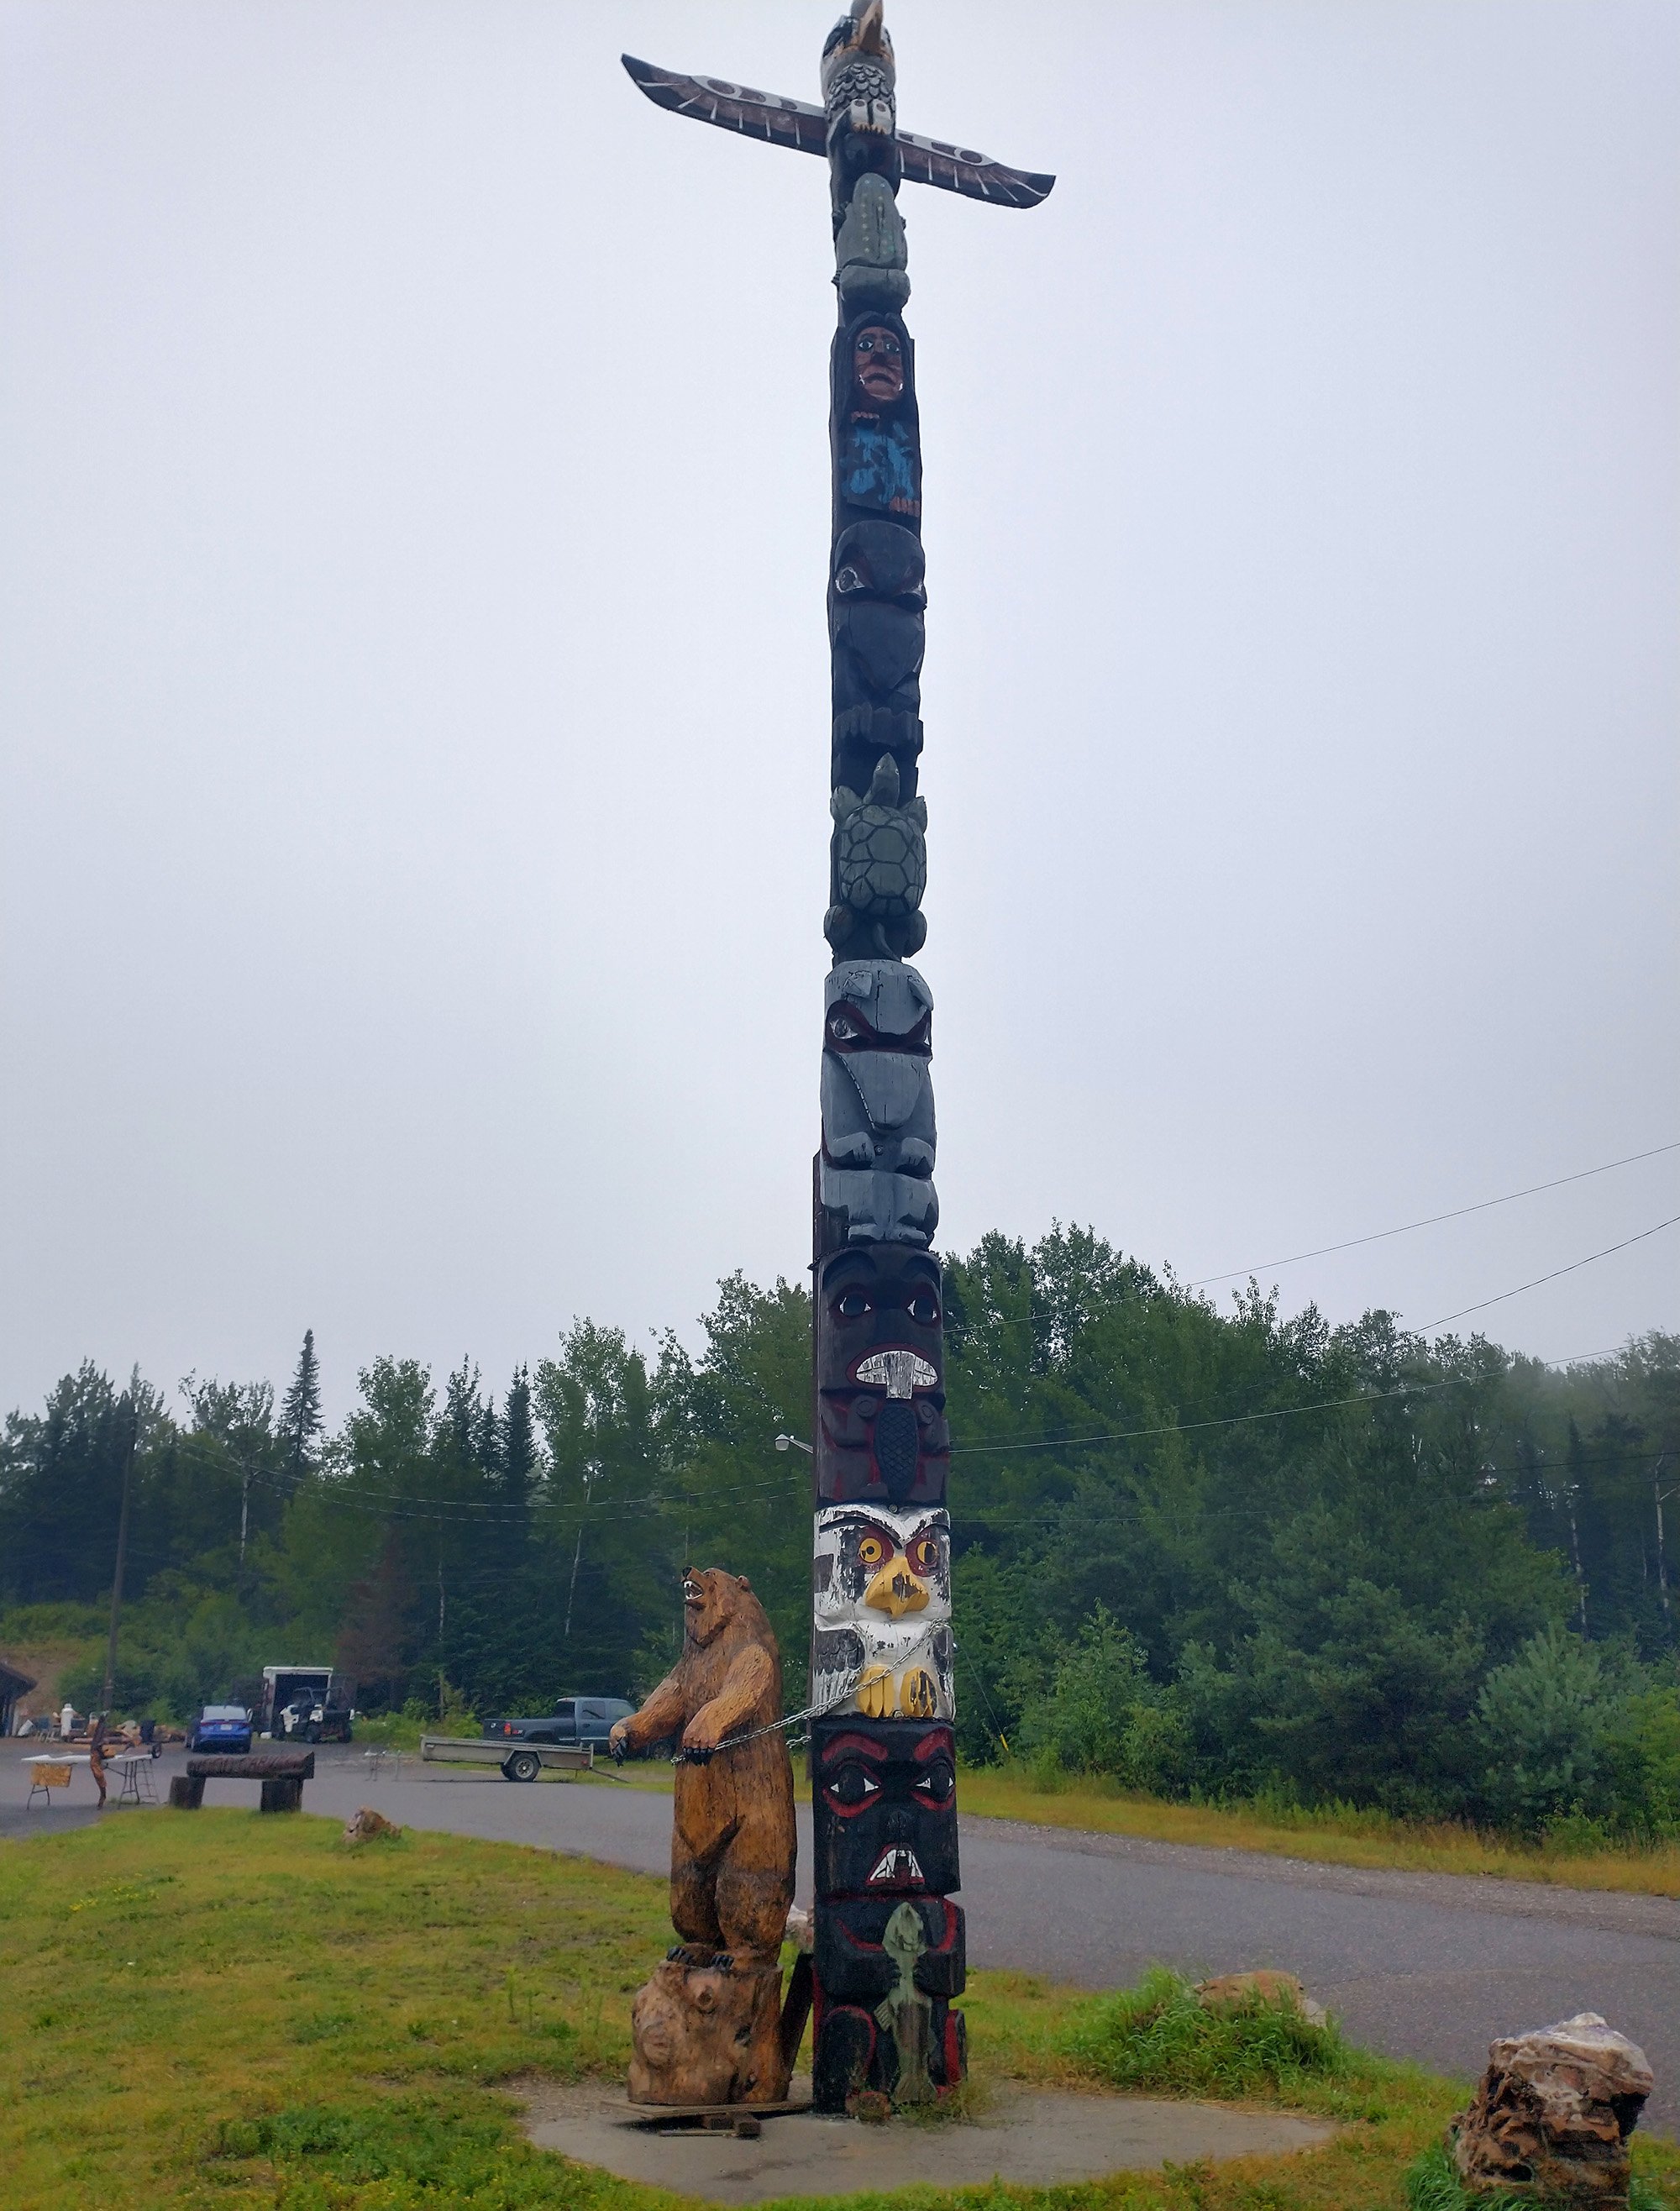 Sadly the fish statue was removed/destroyed. So here's a totem instead.